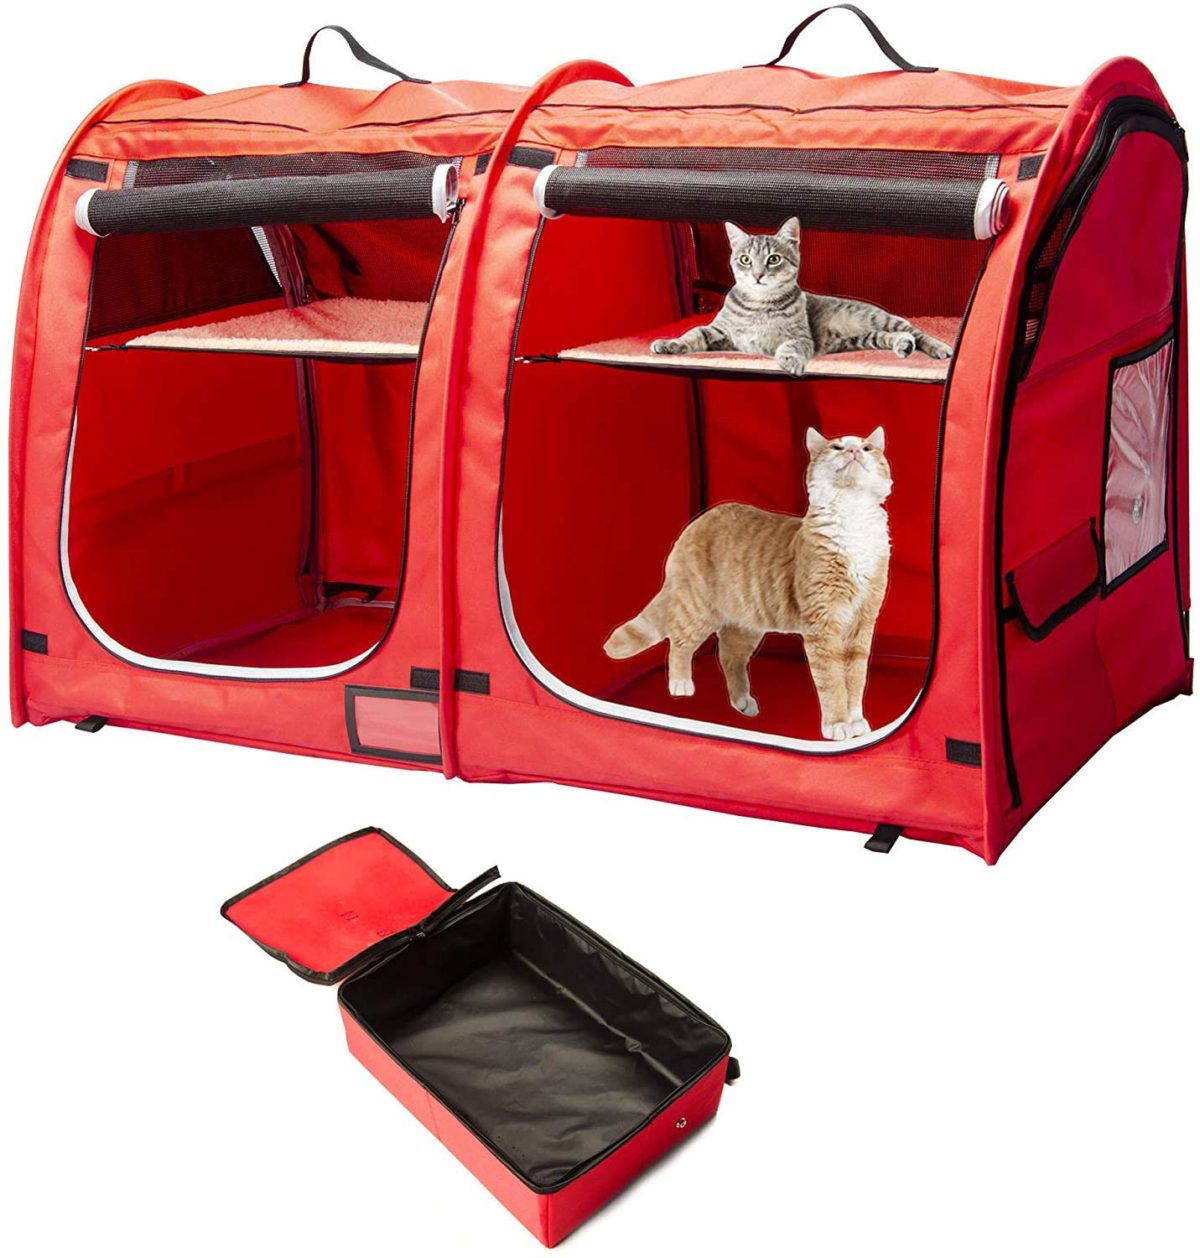 Mispace Portable Twin Compartment Show House Cat Cage